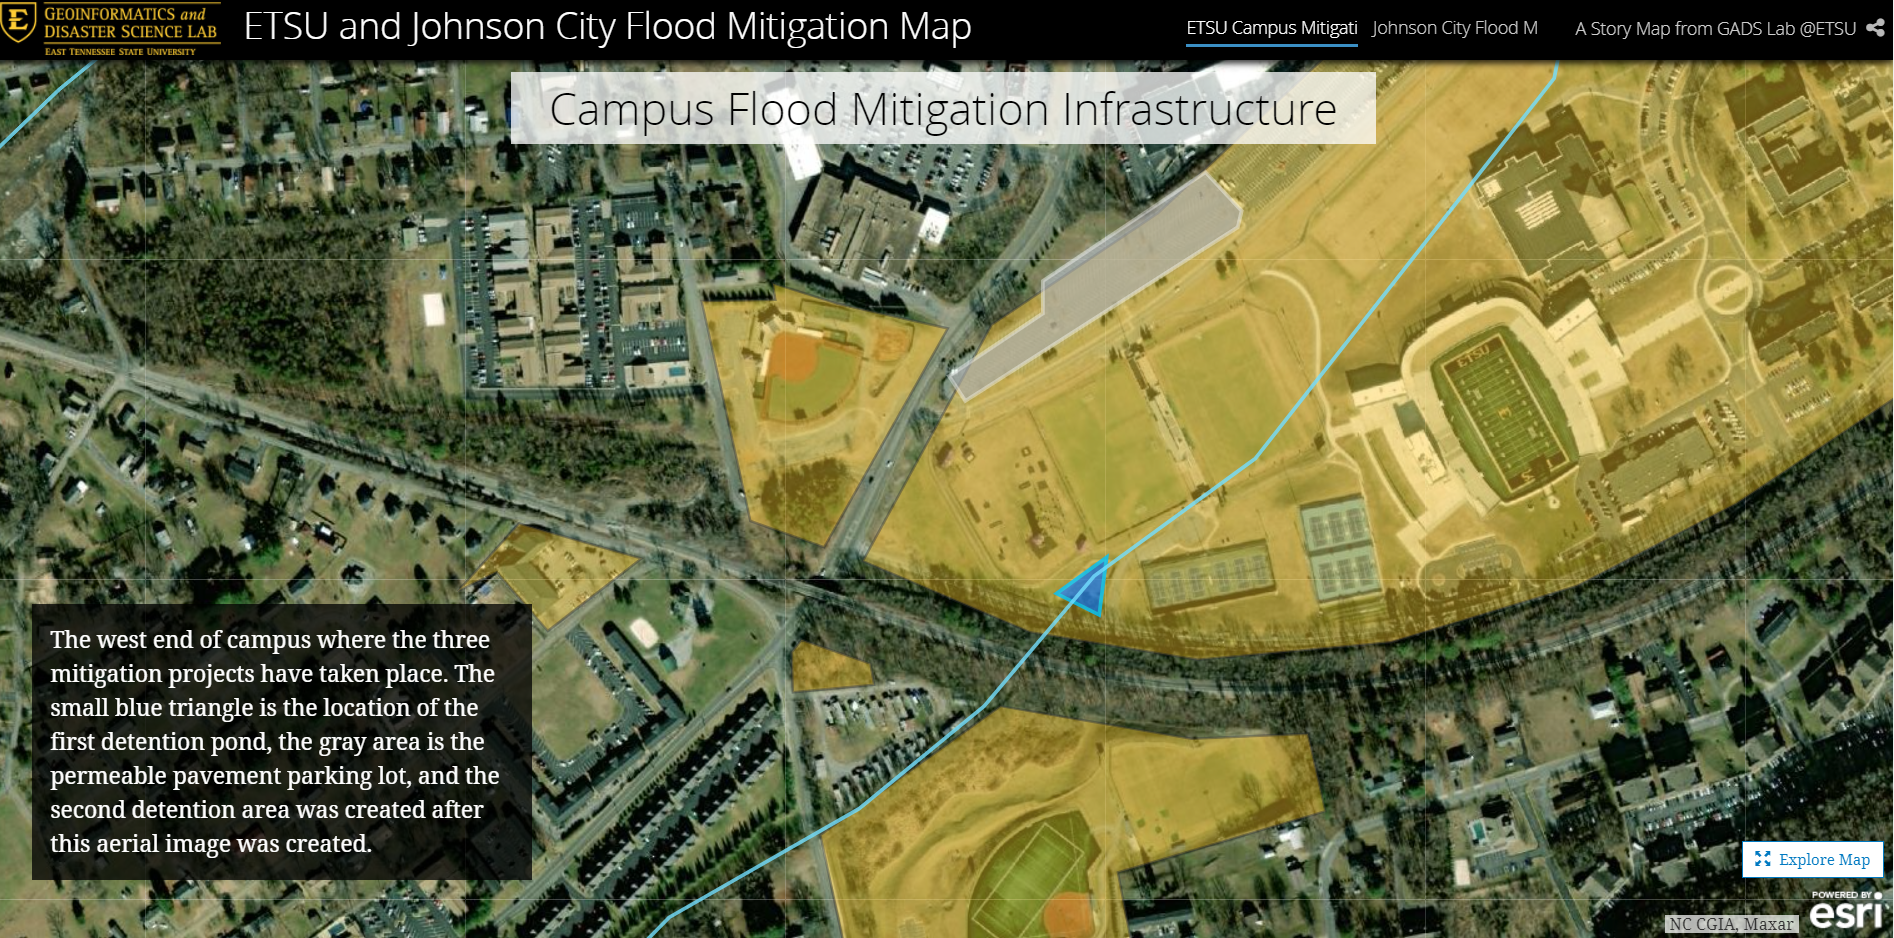 A screenshot taken from the ETSU and Johnson City Flood Mitigation Map, produced by the GADS lab data hub, showing the mitigation infrastructure projects on the west end of campus.